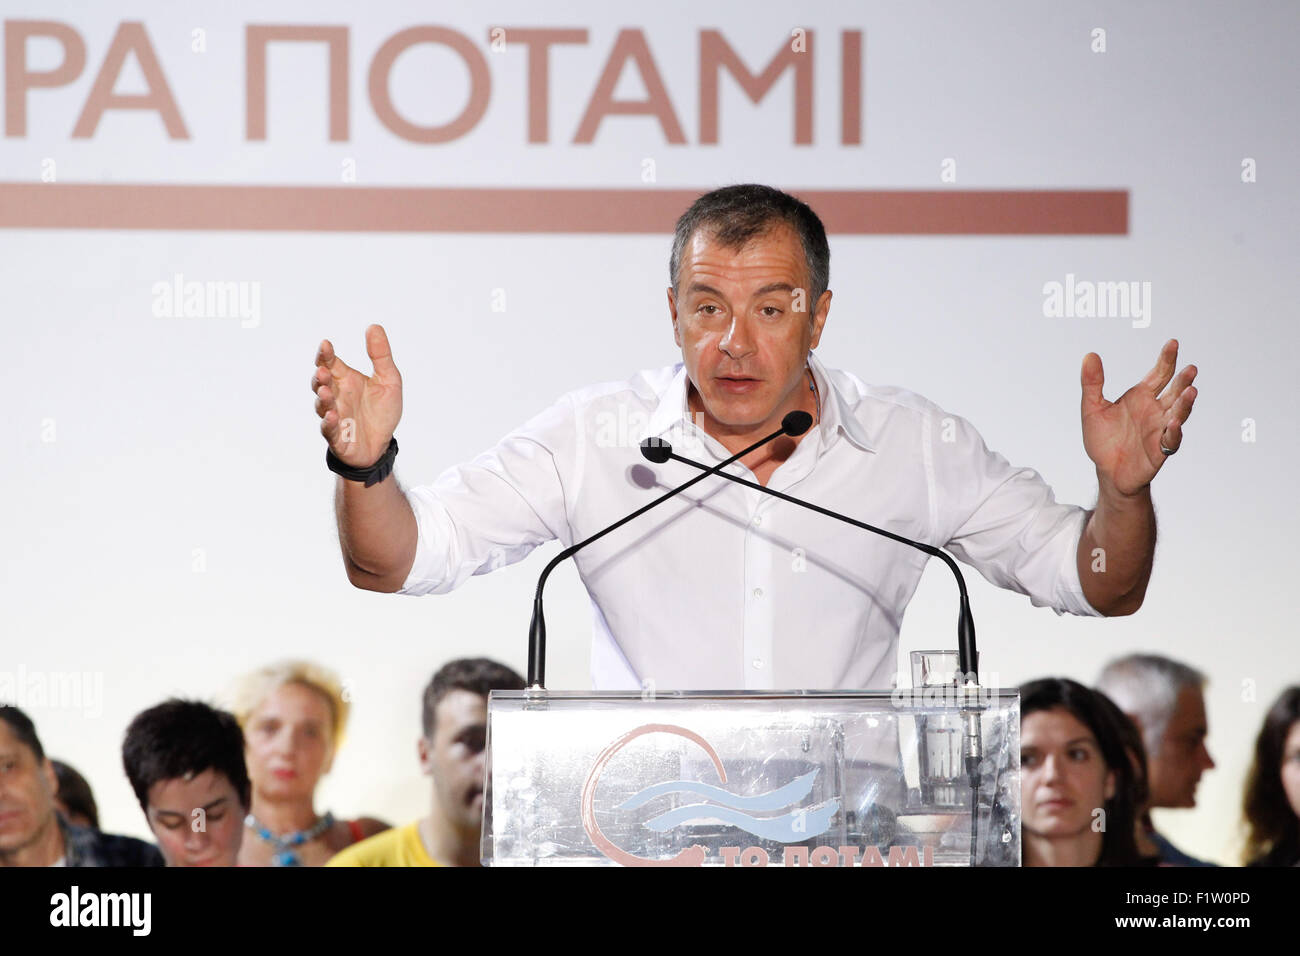 Athens, GREECE. 7th Sep, 2015. Stavros Theodorakis, leader of the political party To Potami (The River) talks during election campaign in northern Athens. Greeks vote in parliamentary elections Sept. 20. © Aristidis Vafeiadakis/ZUMA Wire/Alamy Live News Stock Photo